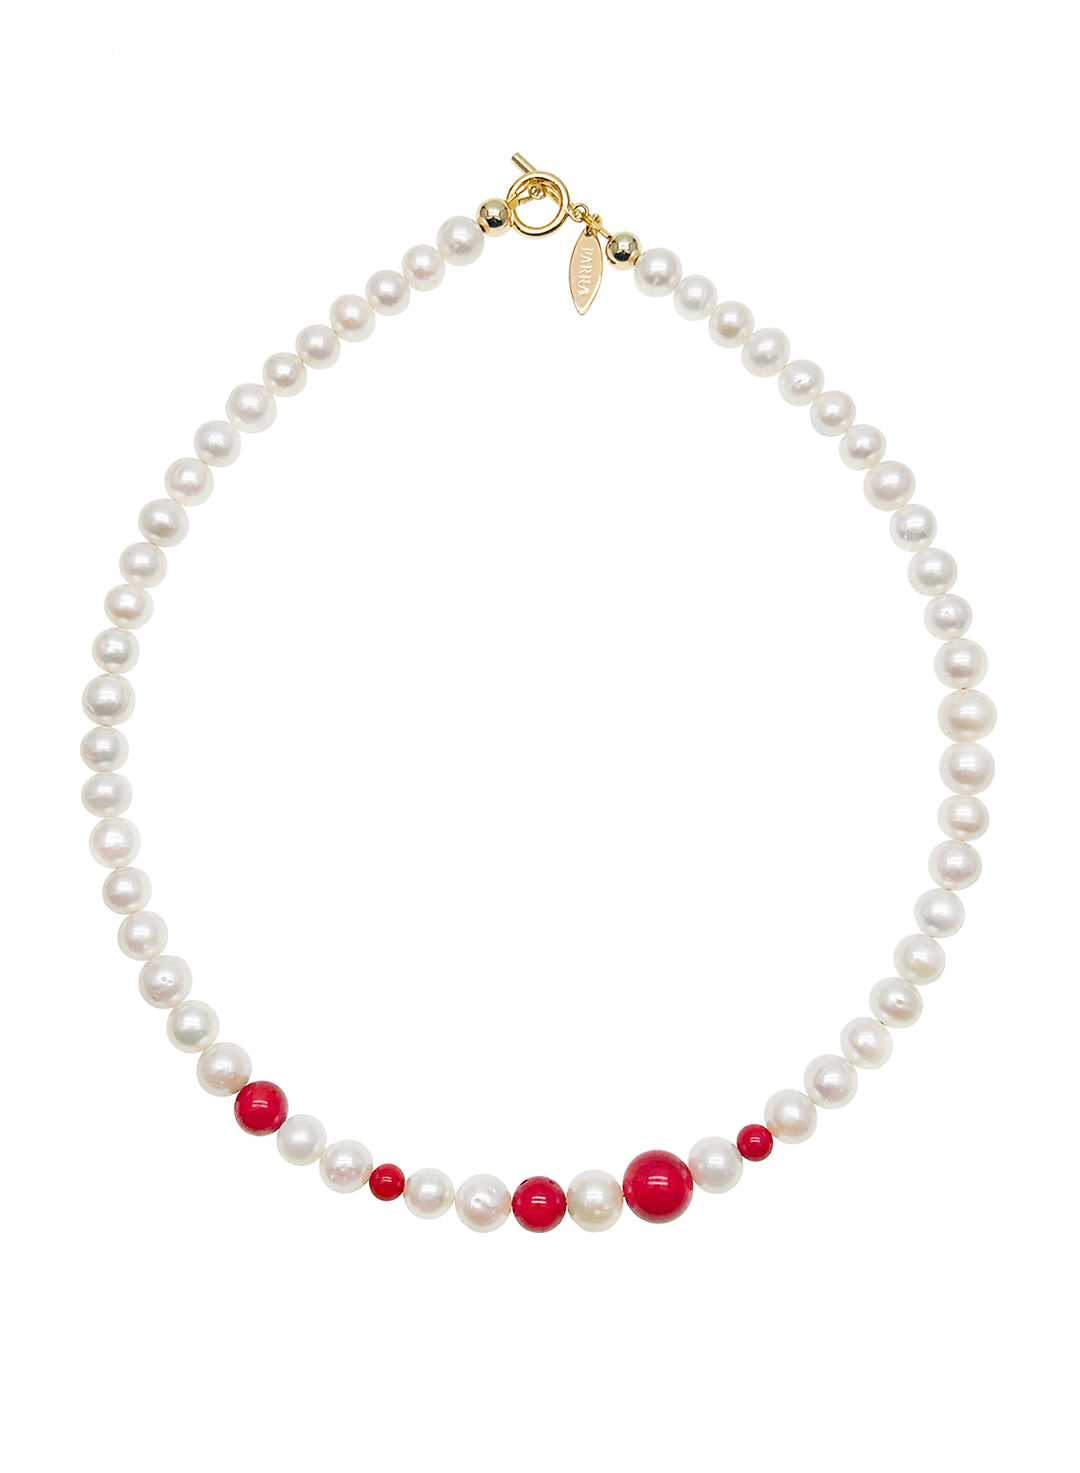 Round White Pearls and Red Coral Mixed Necklace JN002 - FARRA